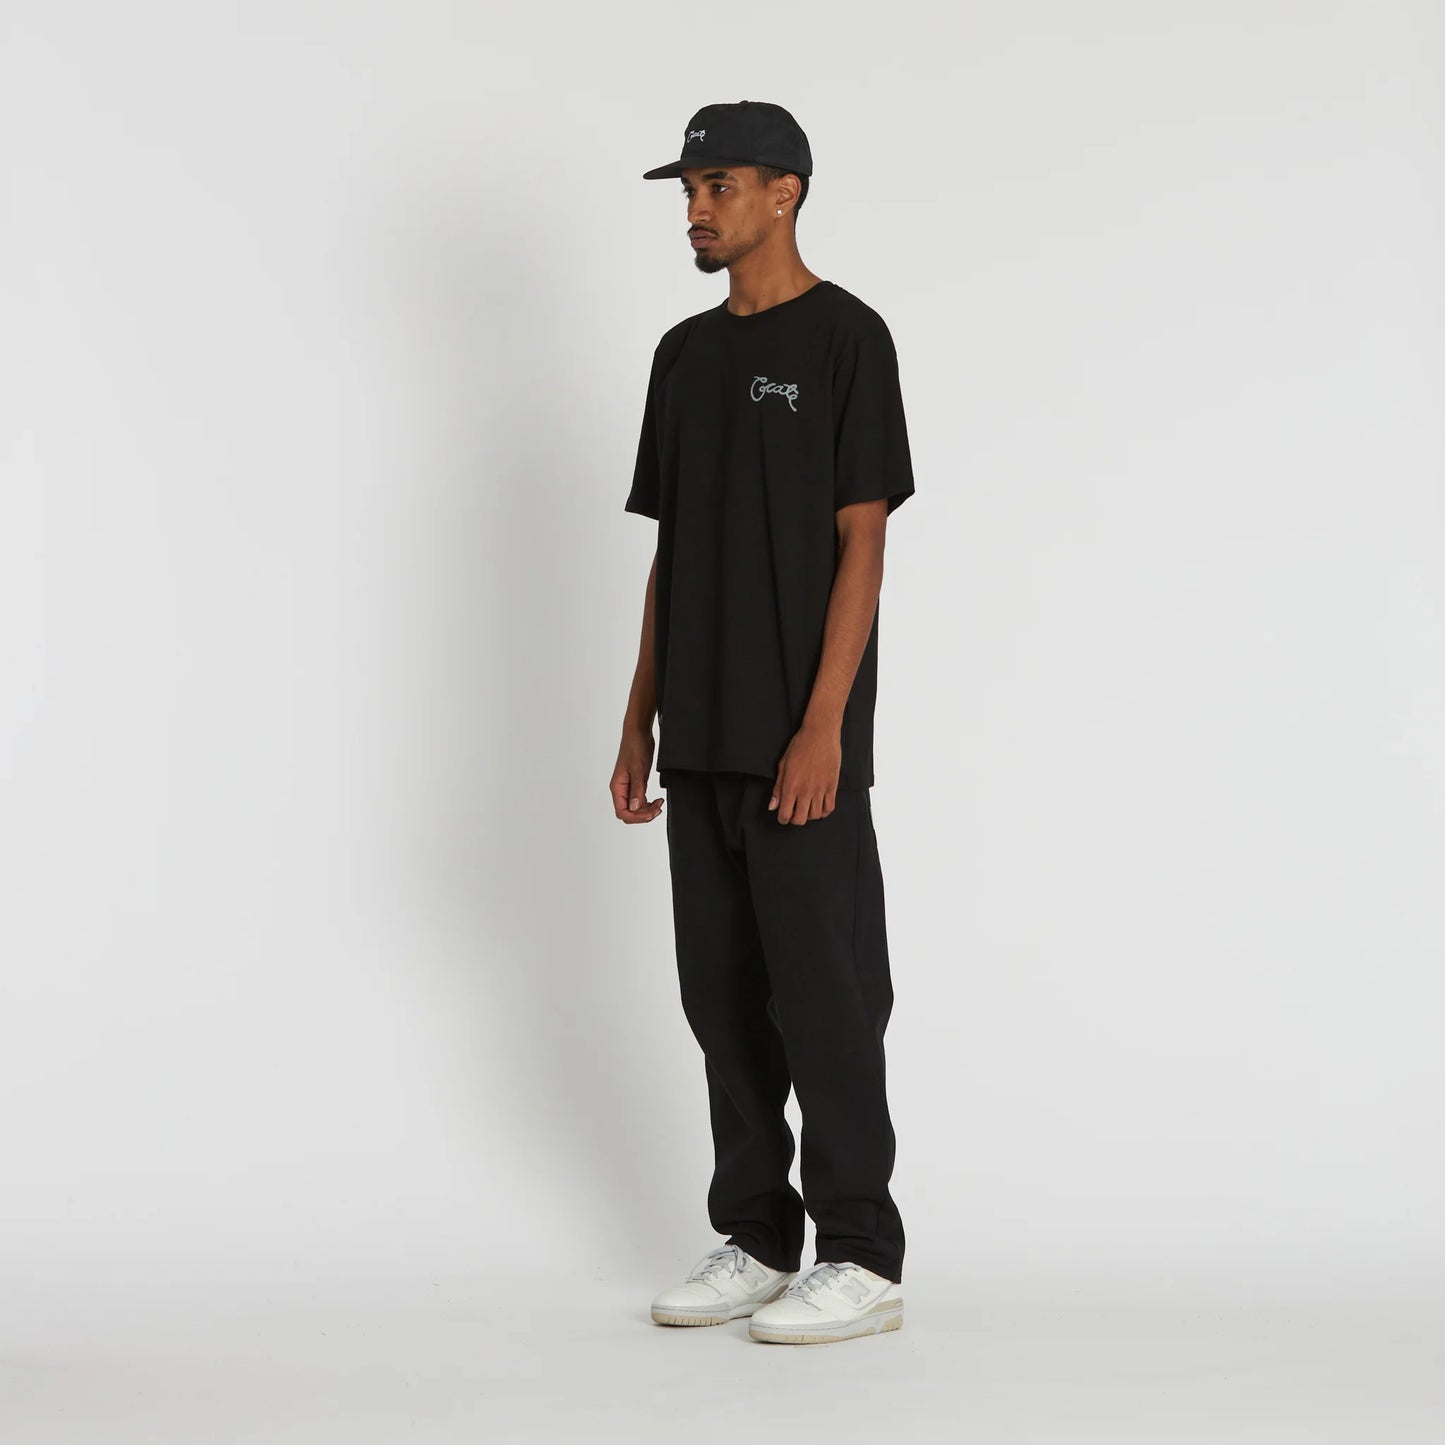 CRATE // Scripted T-Shirt BLACK/REFLECTIVE